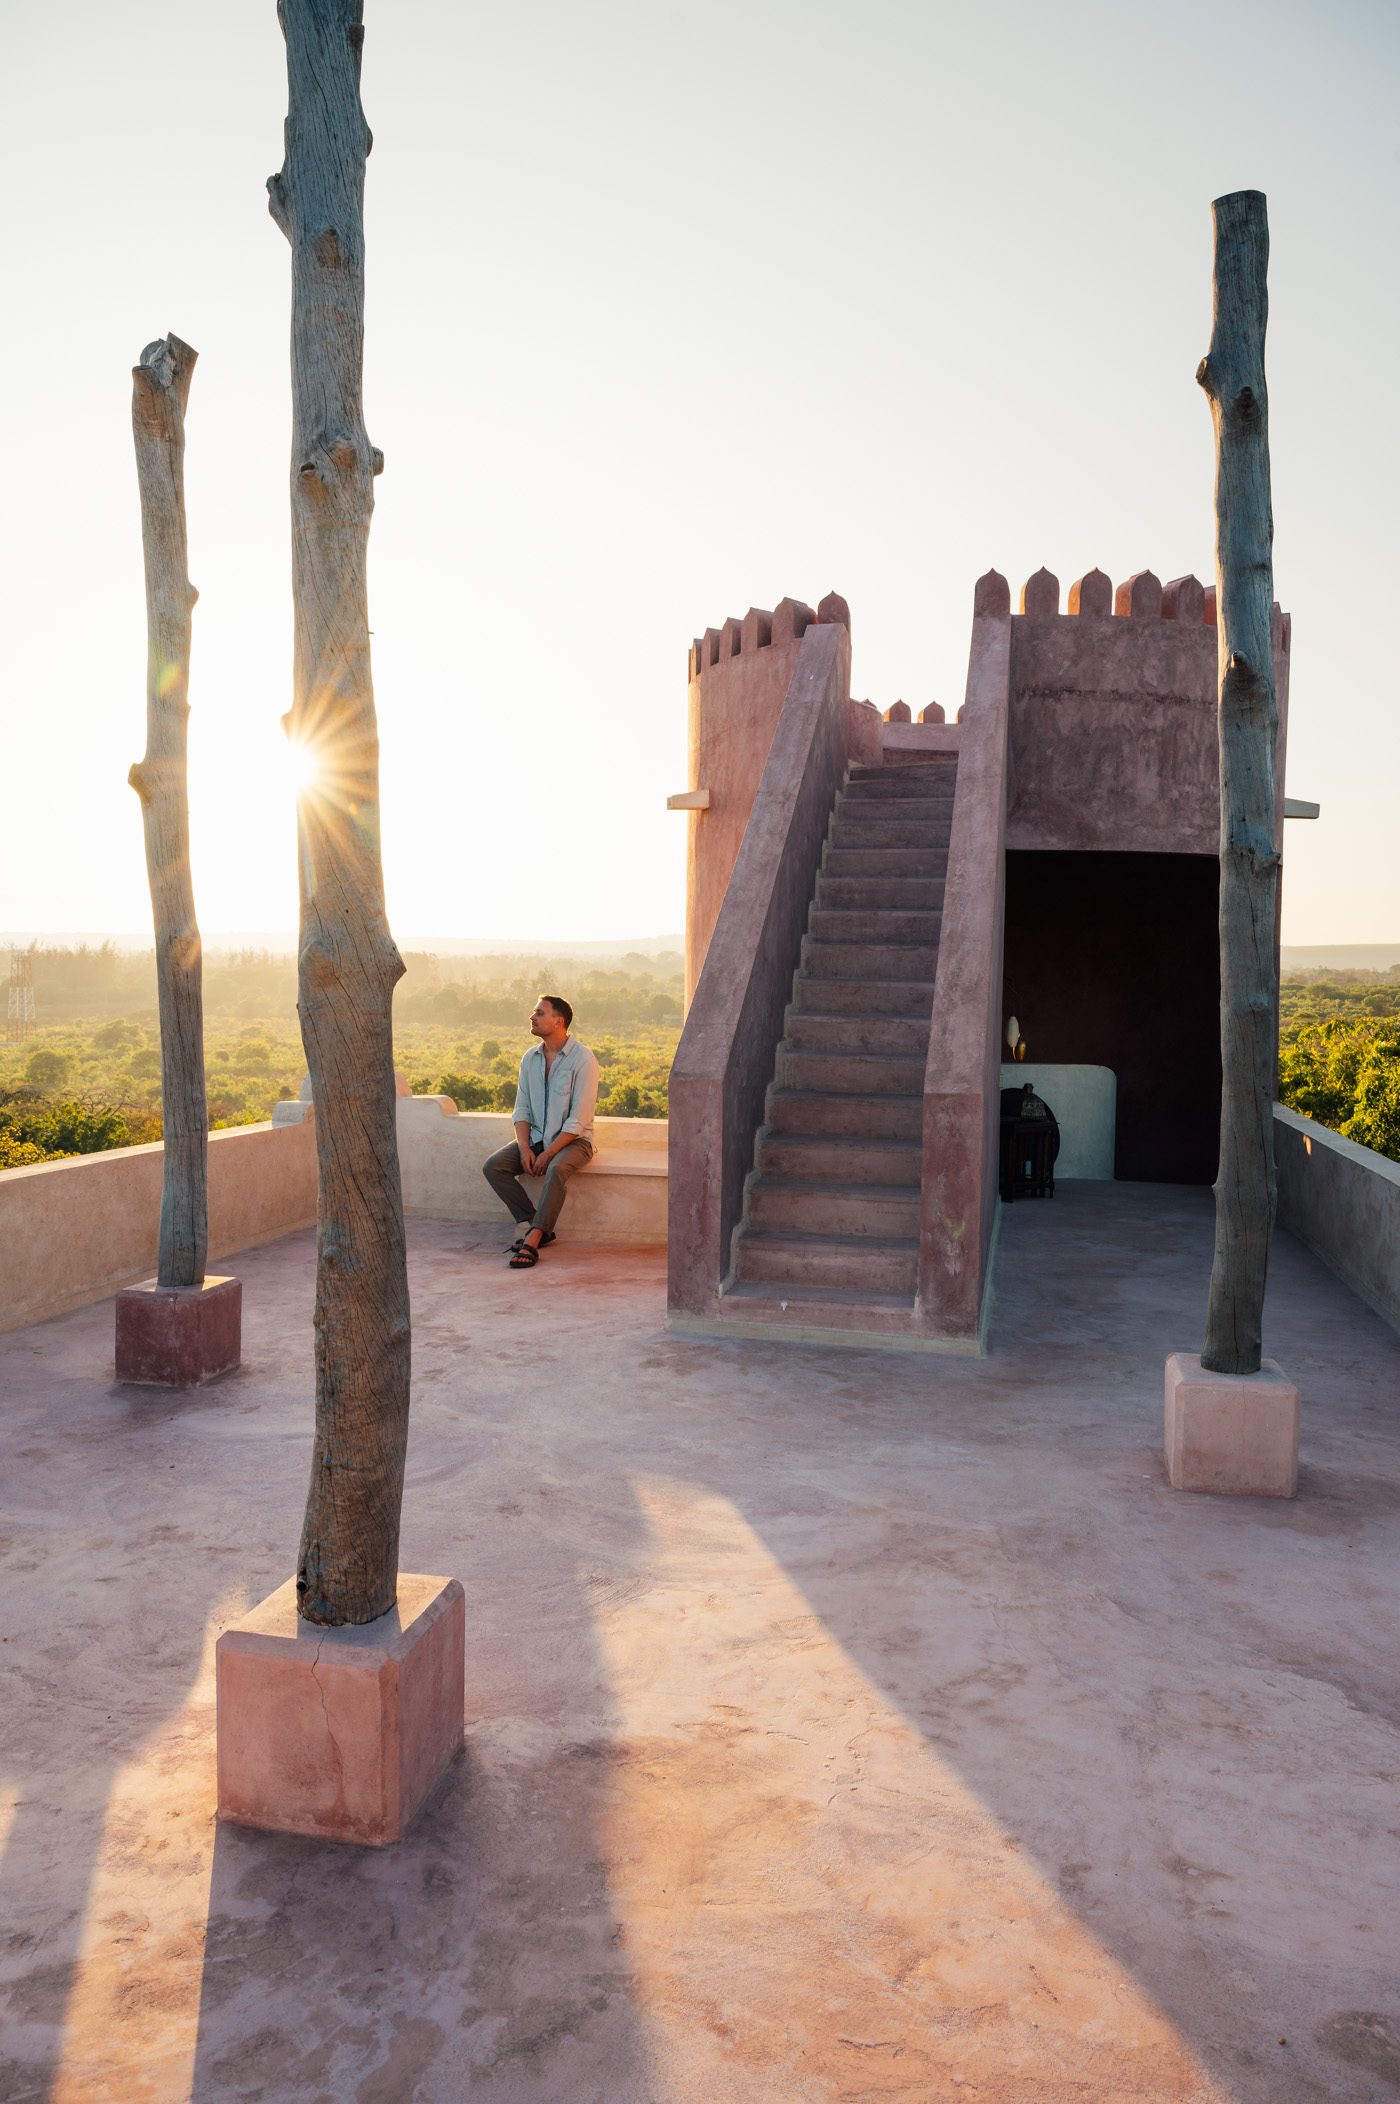 Sundowner on top of the tower suite of Cardamom House